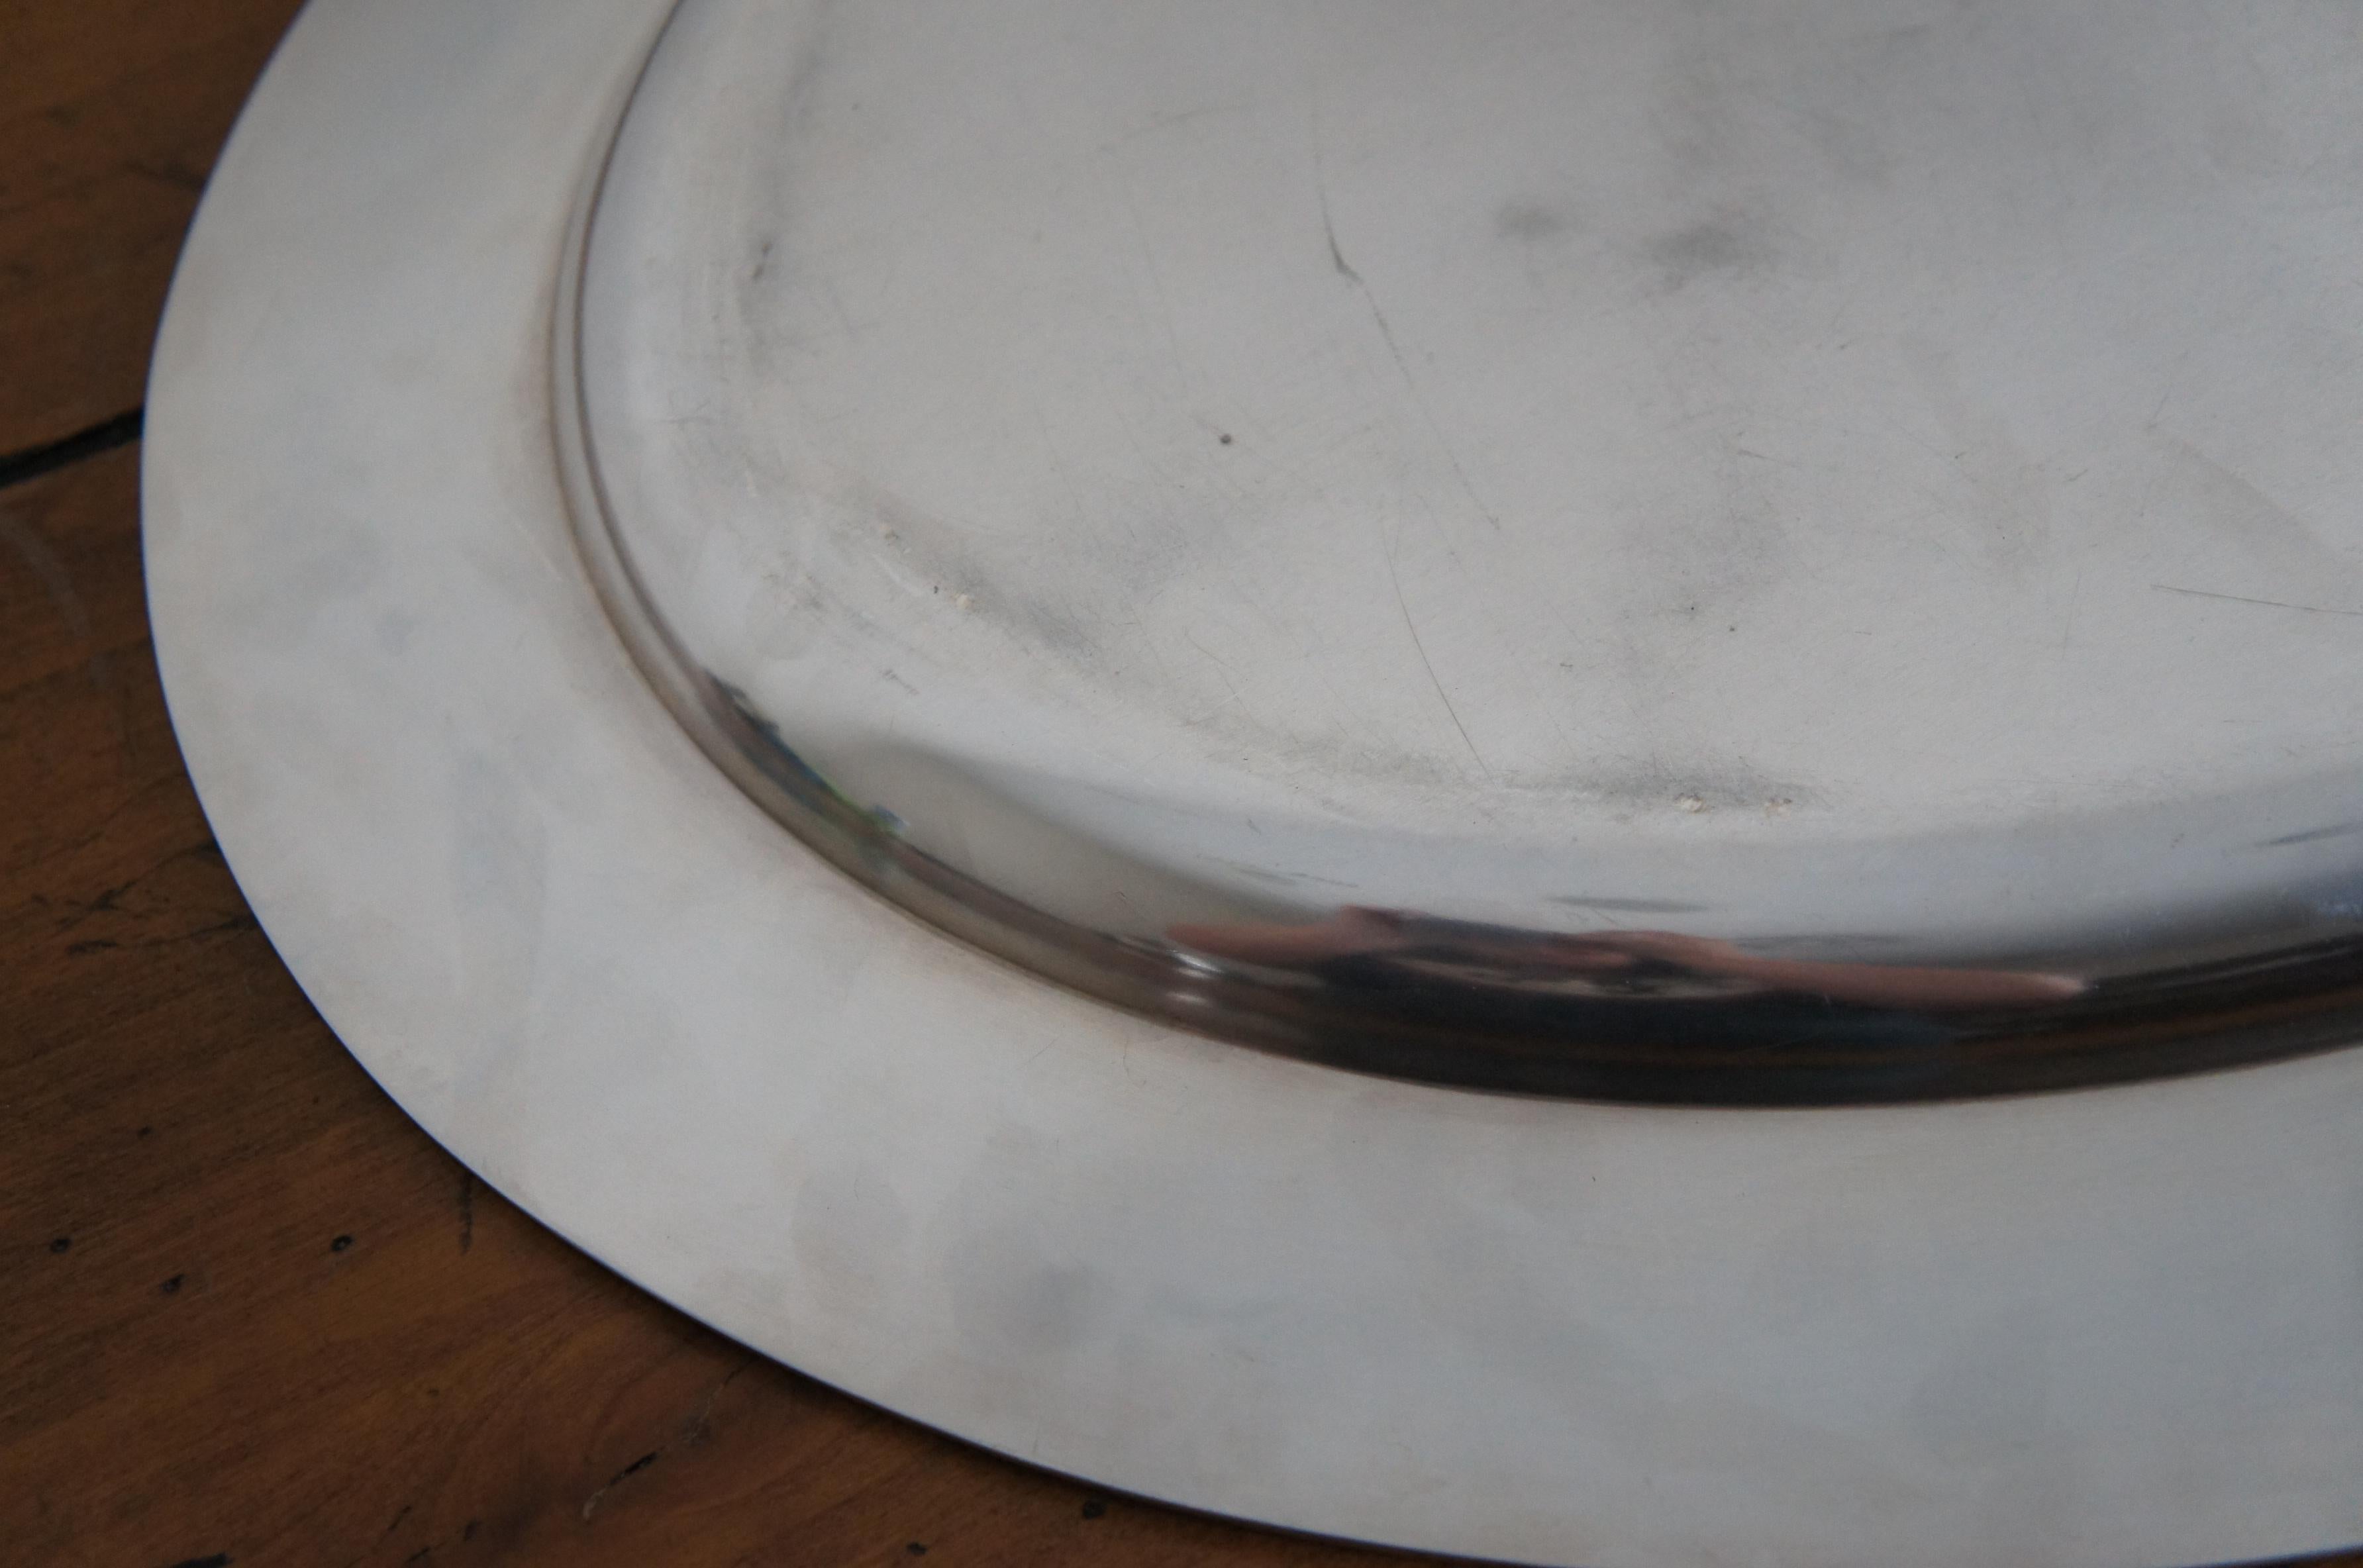 1934 Antique Reed & Barton Silver Plate Oval Serving Vanity Platter Tray 21